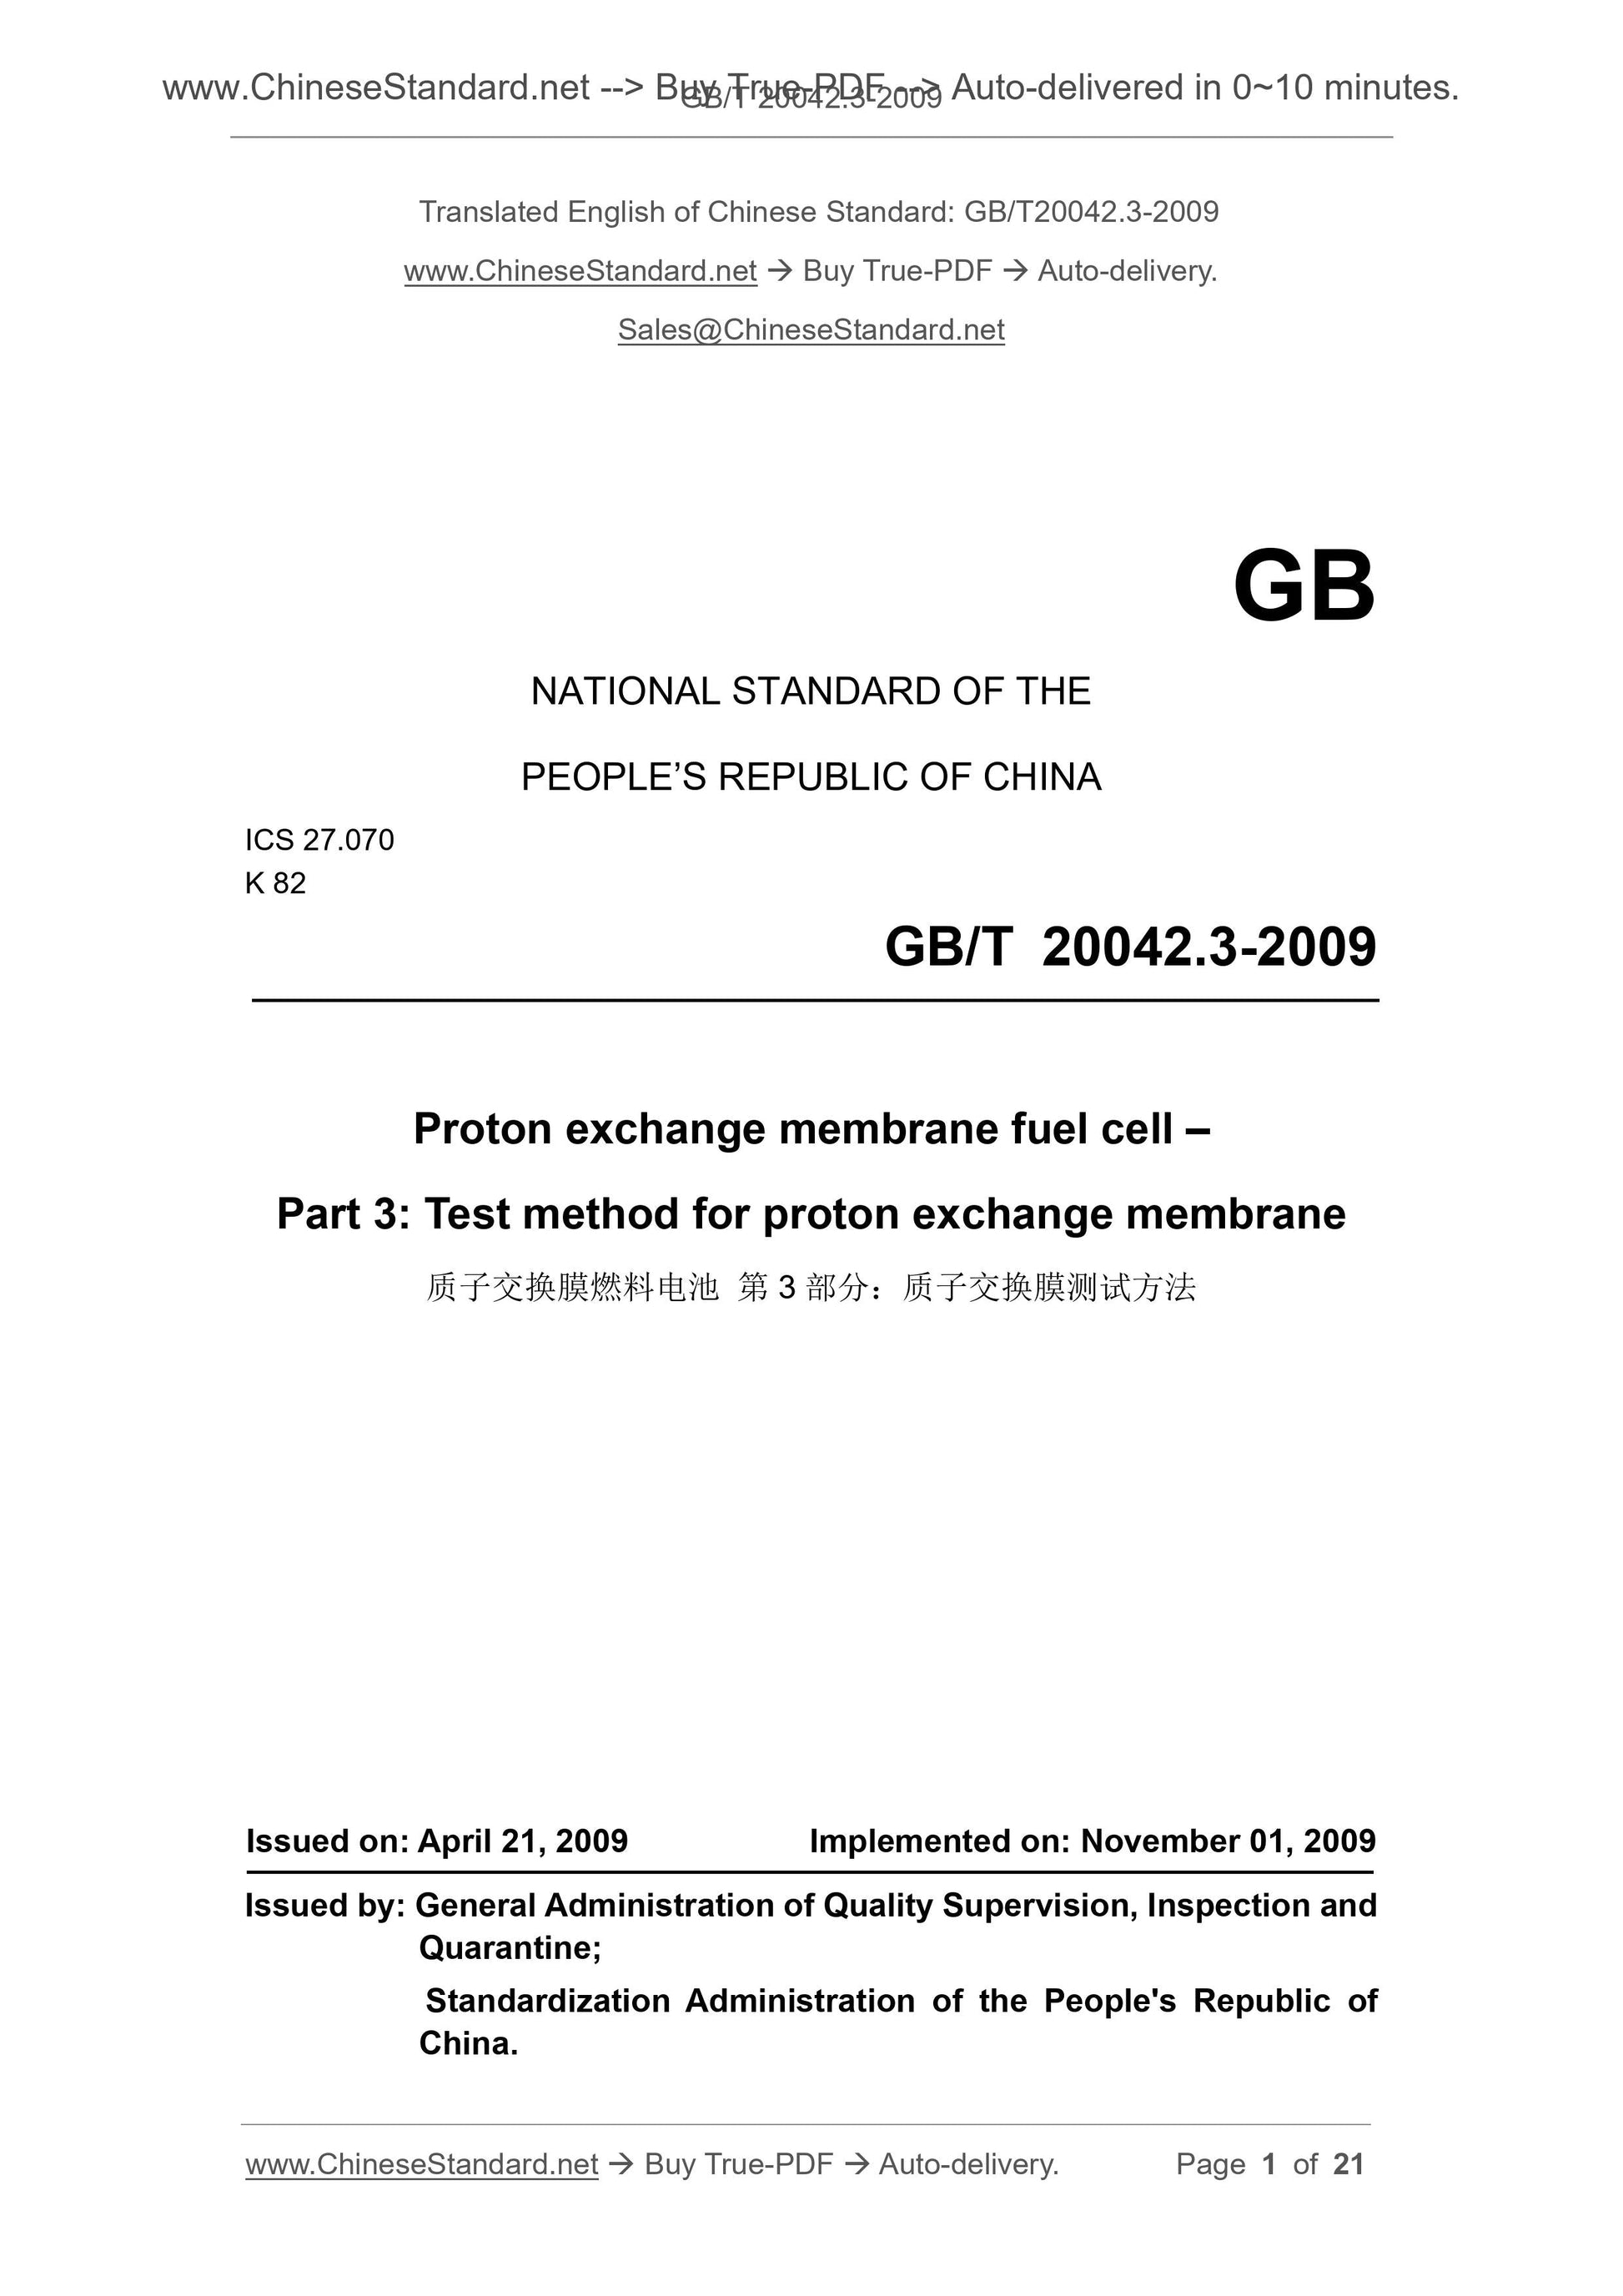 GB/T 20042.3-2009 Page 1